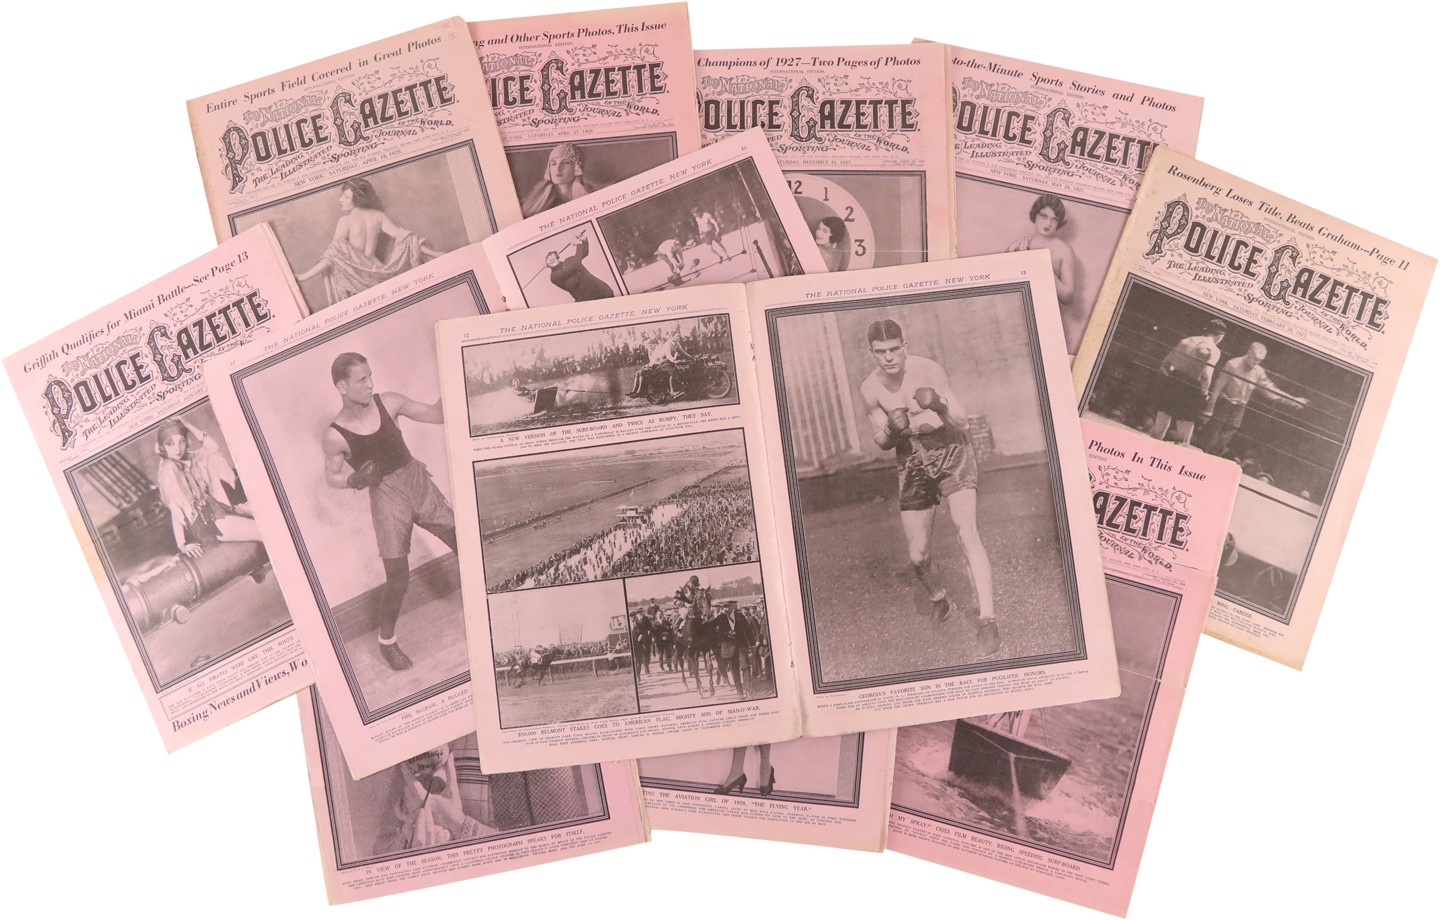 - National Police Gazettes from 1925-30 with Boxing Supplements (13)